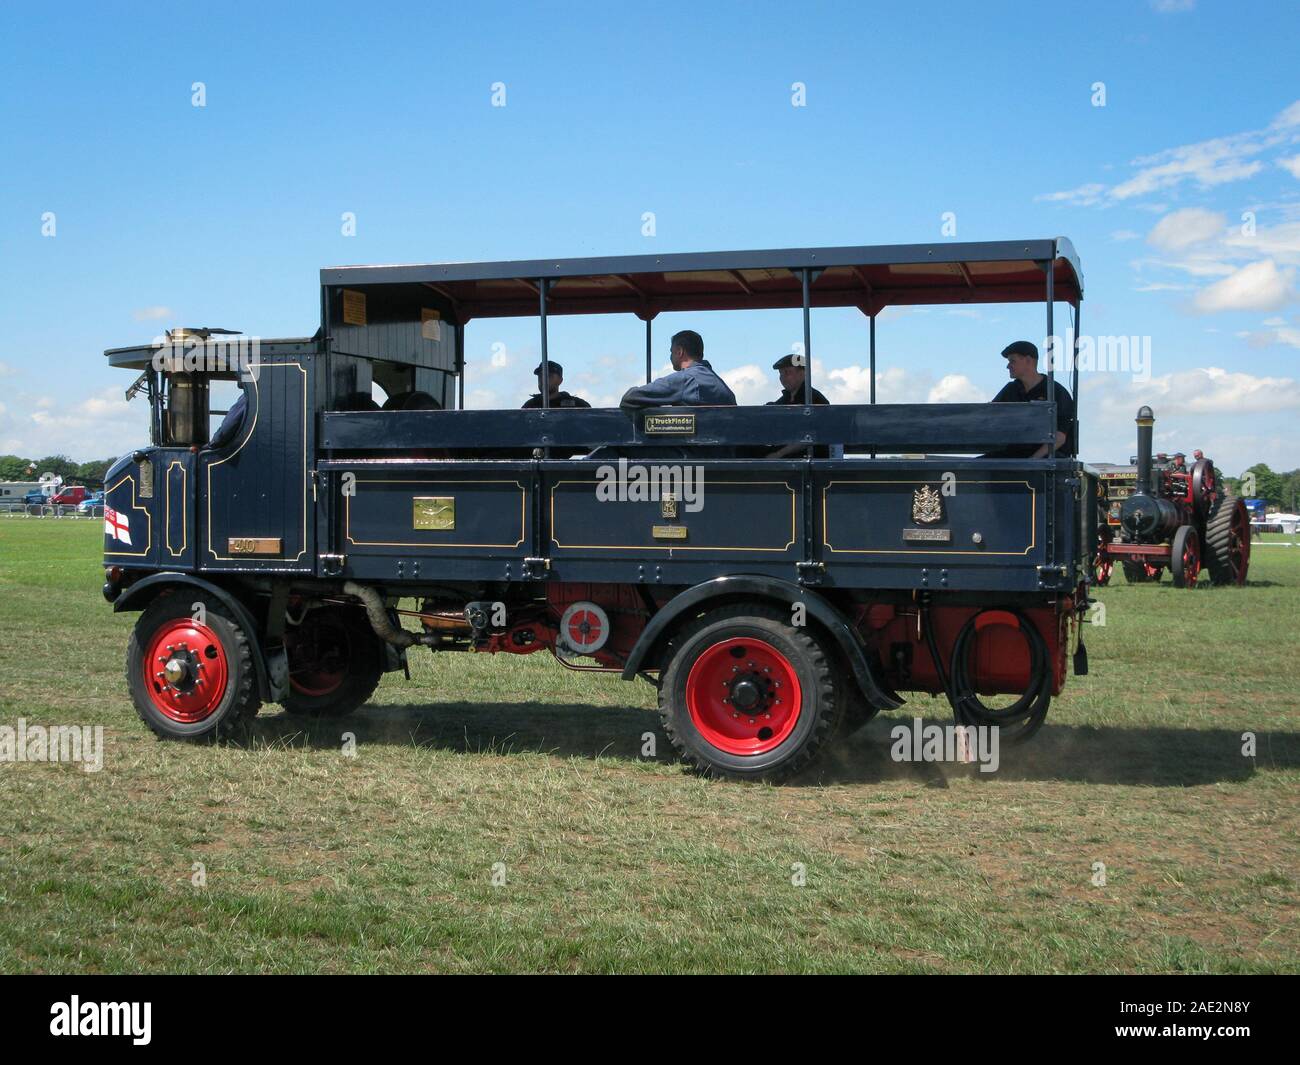 A Sentinel steam wagon once used for commercial haulage. Stock Photo